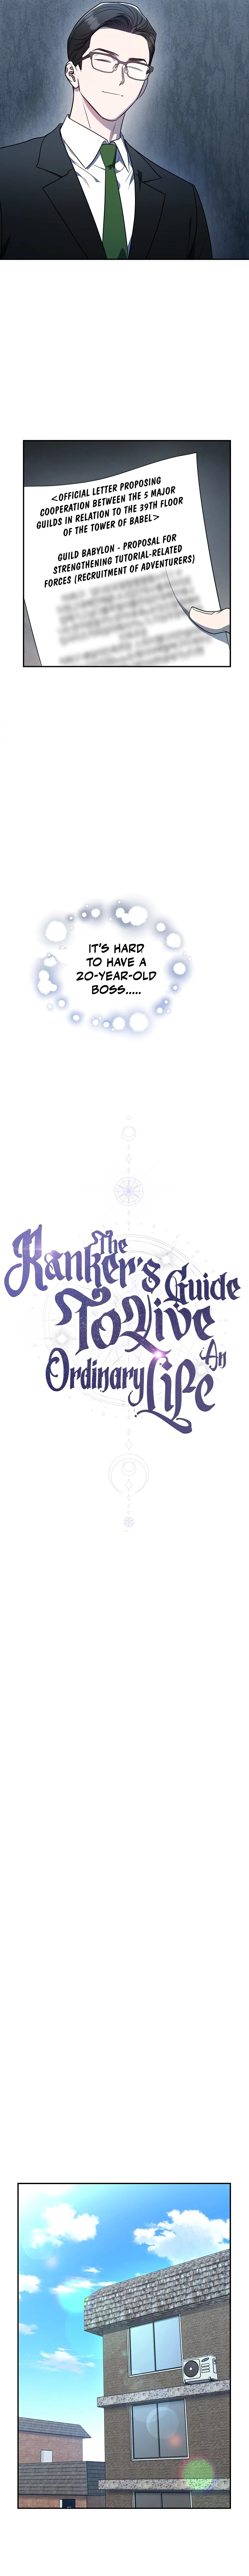 The Rankers Guide to Live an Ordinary Life HOT image